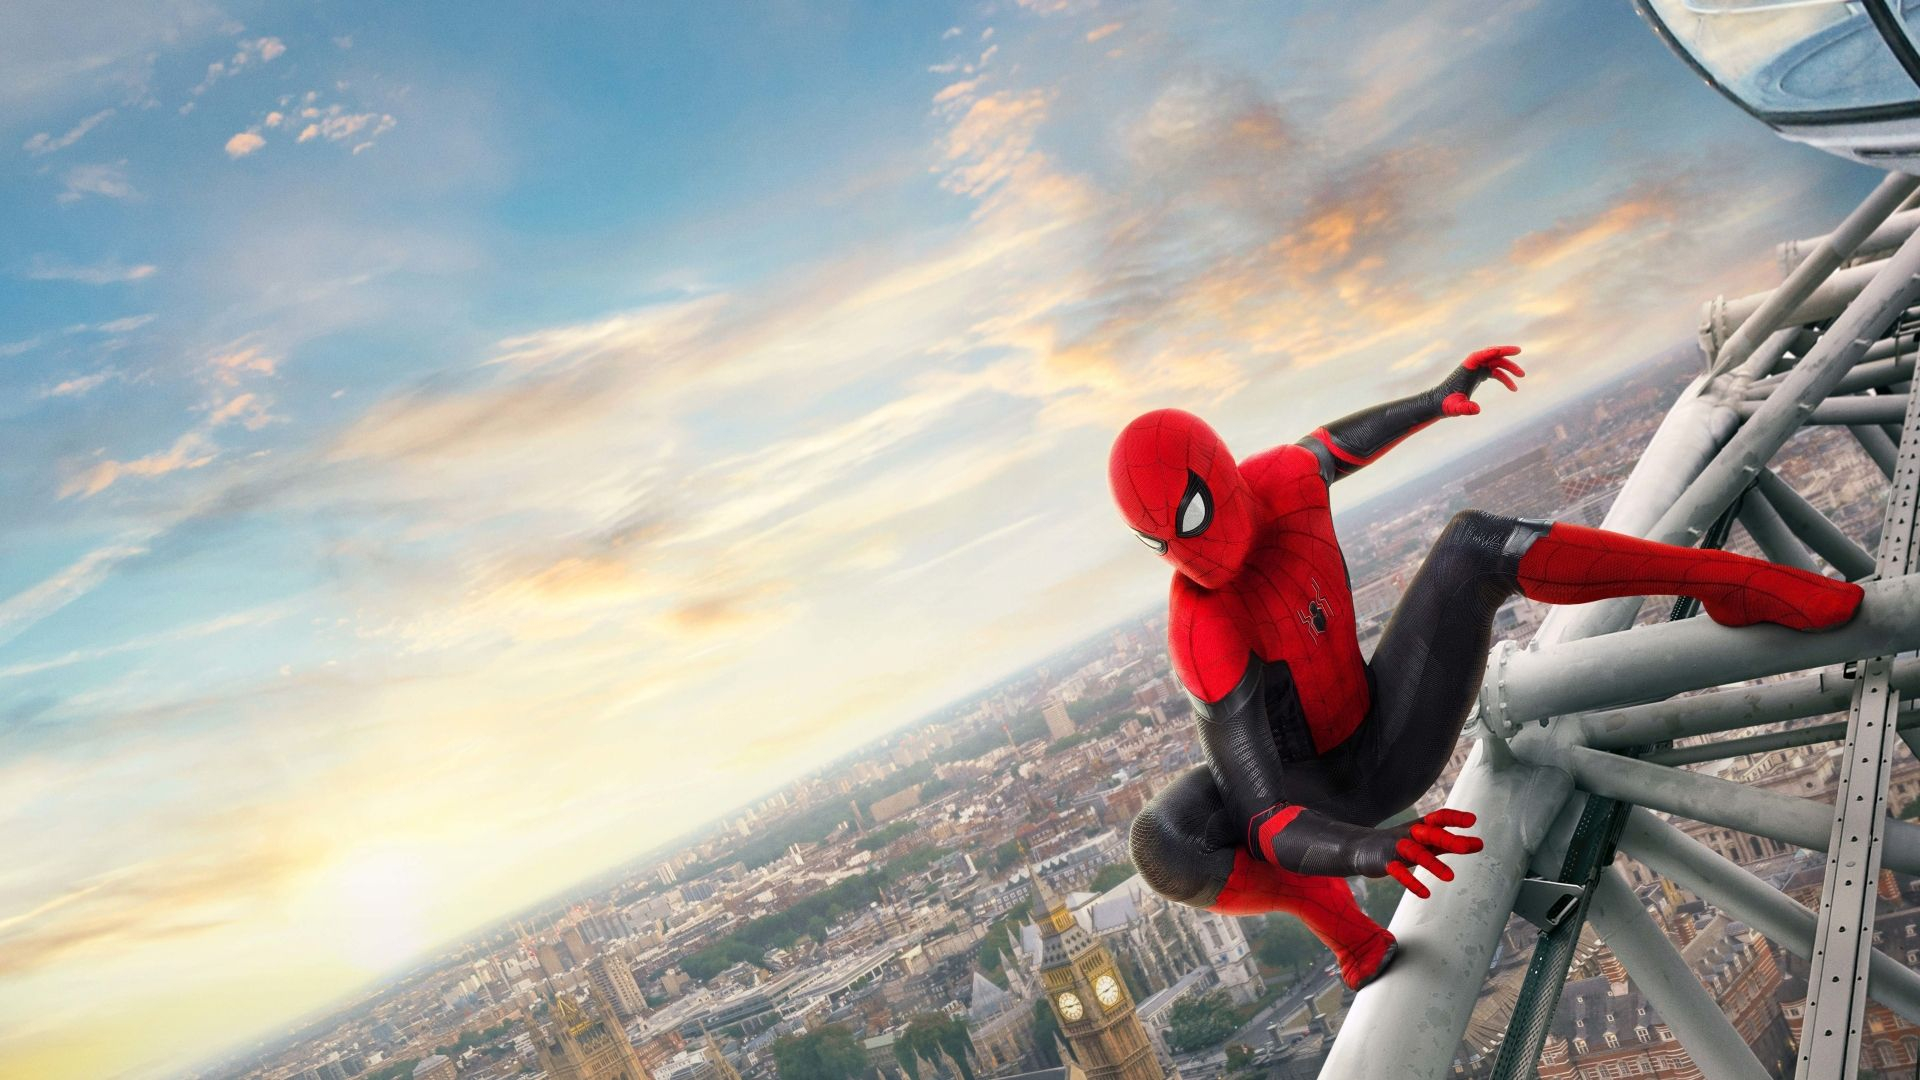 1920x1080 Spider-Man Far From Home 4K 1080P Laptop Full HD Wallpaper, HD Movies 4K Wallpapers, Images, Photos and Background Wallpapers Den | Marvel wallpaper hd, Cute desktop wallpaper, Computer wallpaper hd